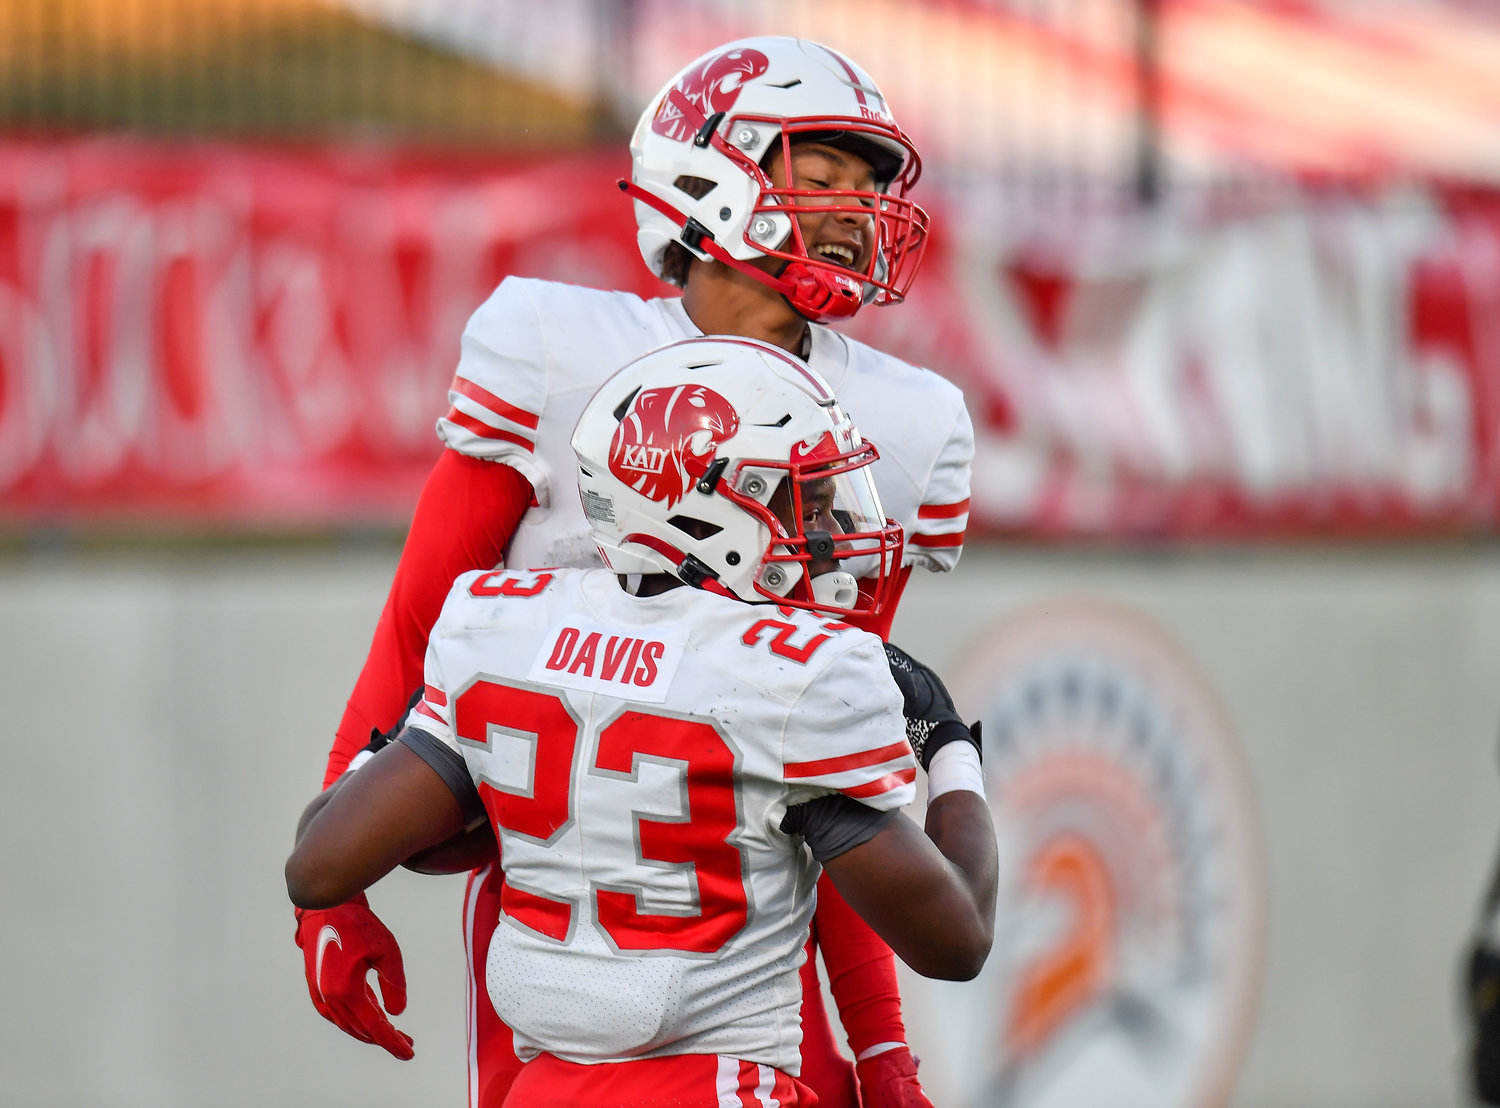 Katy, Tx. Nov 5, 2021, 2021: Katy's  Seth Davis #23 celebrates a TD with team mate Nic Anderson #4 during a conference game between Katy and Morton Ranch at Legacy Stadium in Katy. (Photo by Mark Goodman / Katy Times)